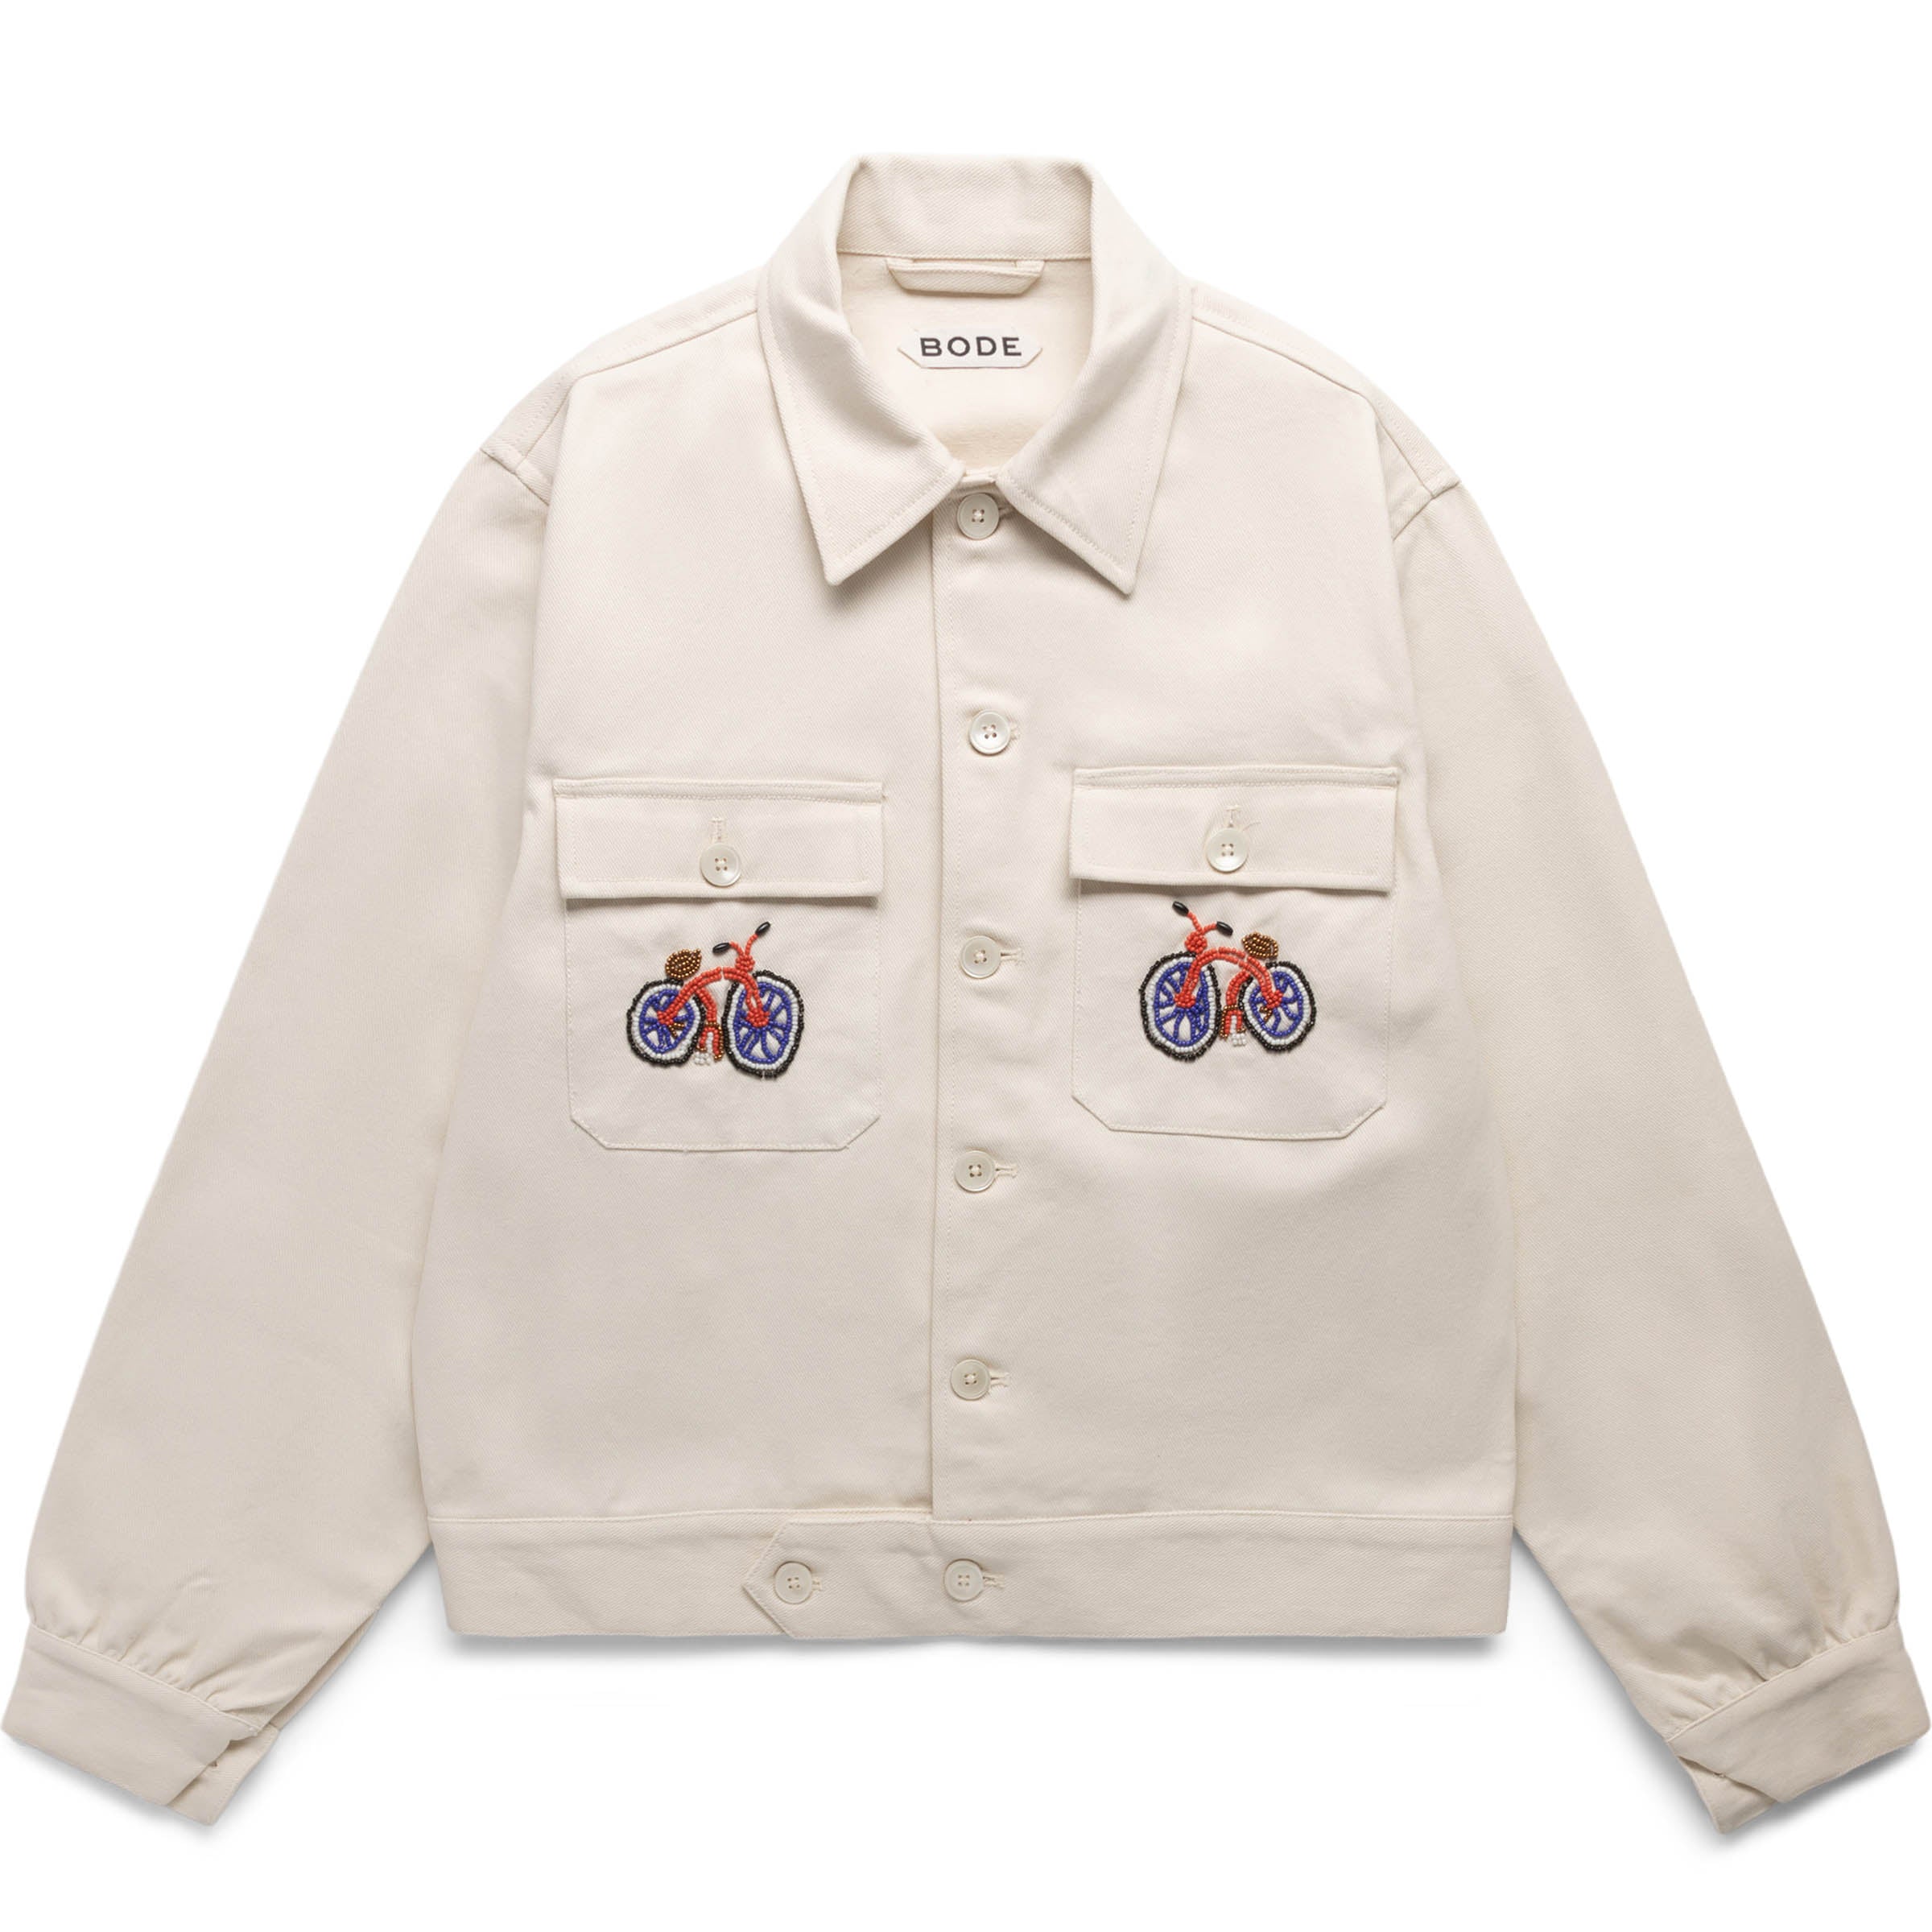 Bode Off-White Bicycle Jacket